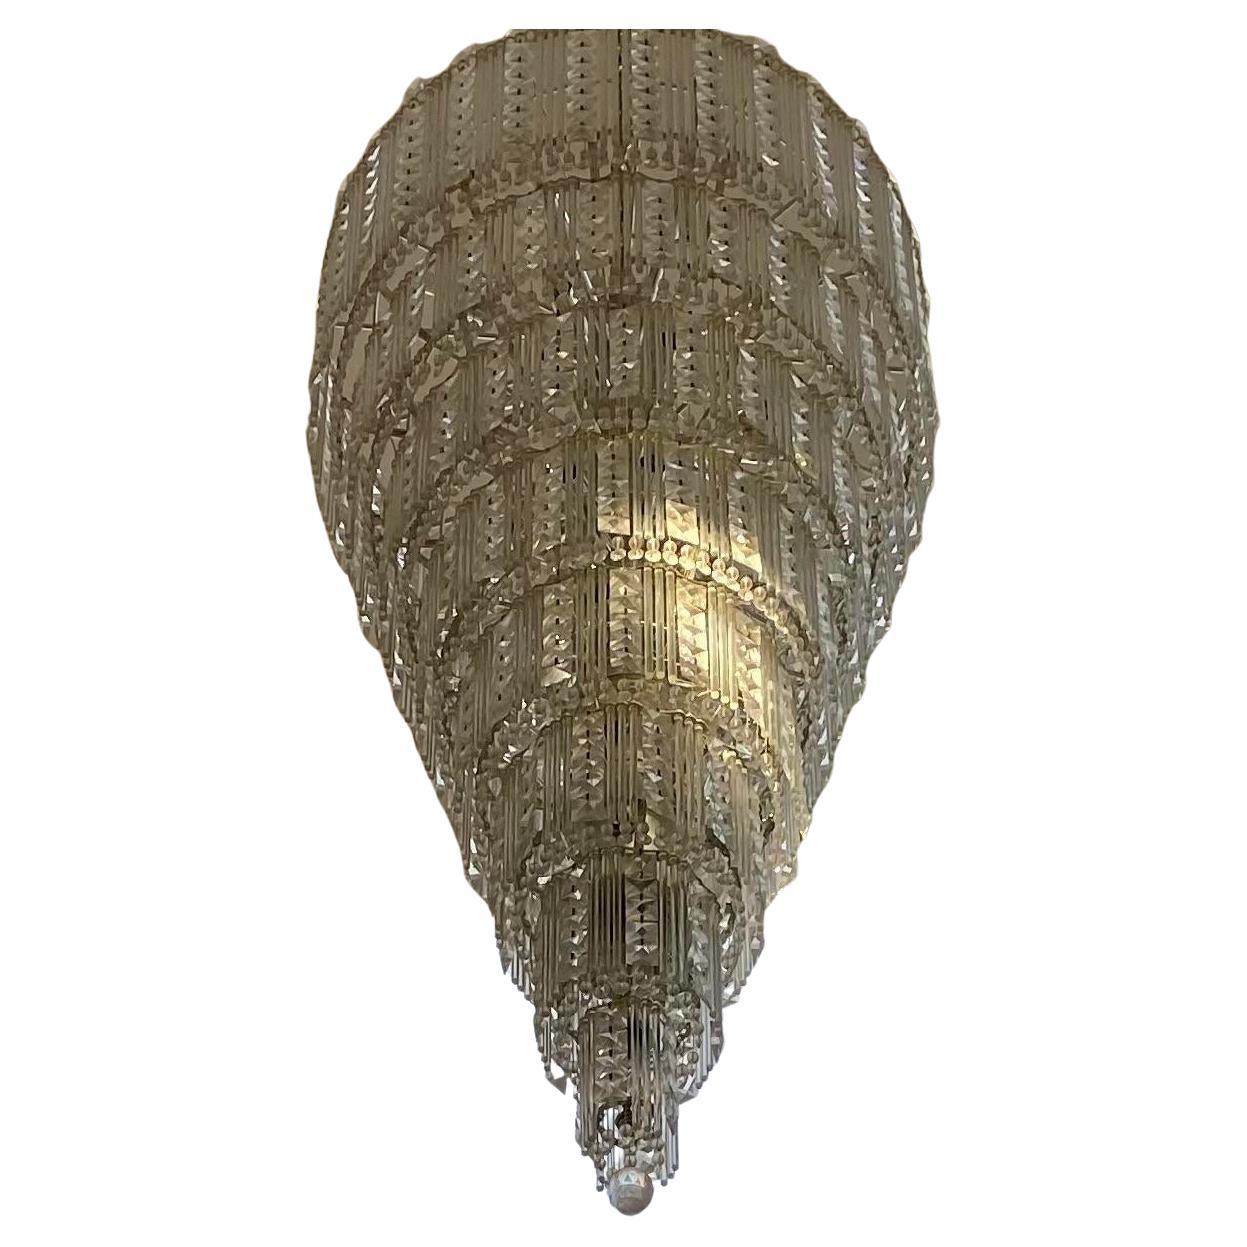 Schonbek Quarttro (7836G)

A timeless classic contemporary design featuring 8 tiers and 49 lights. Includes a crystal canopy

In 1870, young Adolph Schonbek left his grandfather’s glassworks to found A. Schonbek & Co. The young entrepreneur